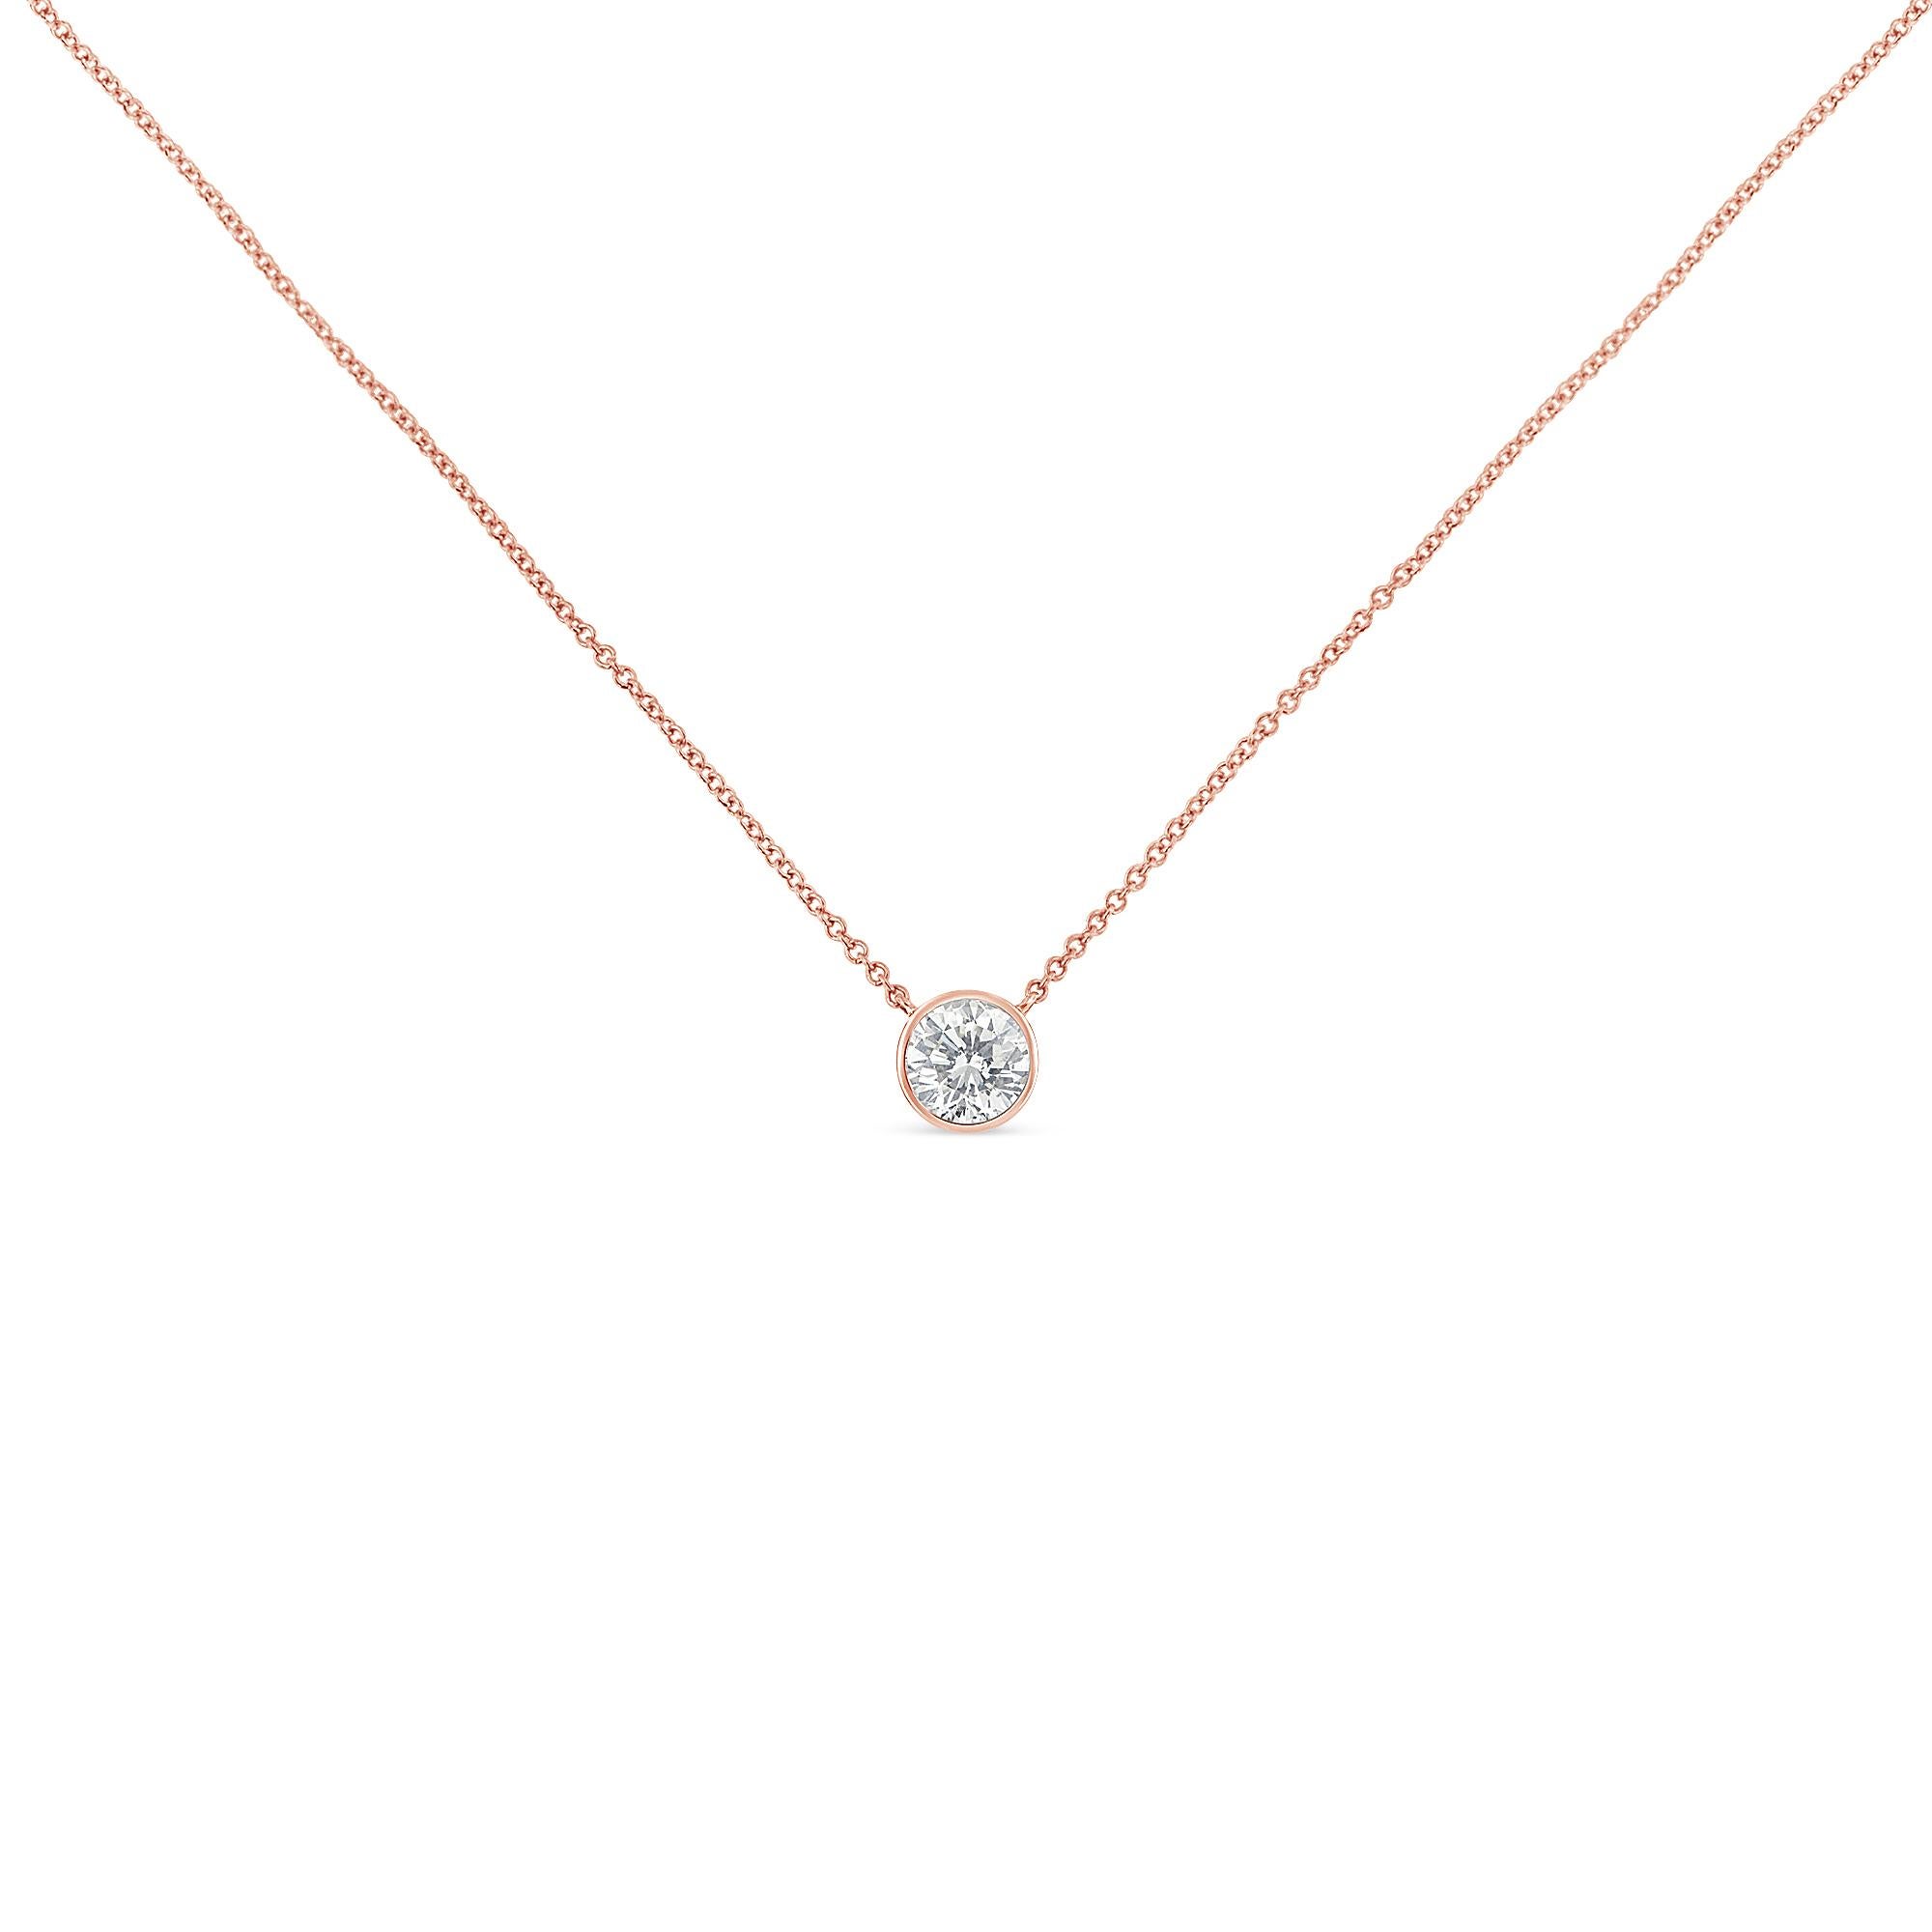 A twinkling 1/10ct round diamond rests in a soft bezel setting. Anchored on each side, a cable chain holds the pendant in place. This 10k rose gold necklace is the perfect option for everyday wear. 'Video Available Upon Request'

Product